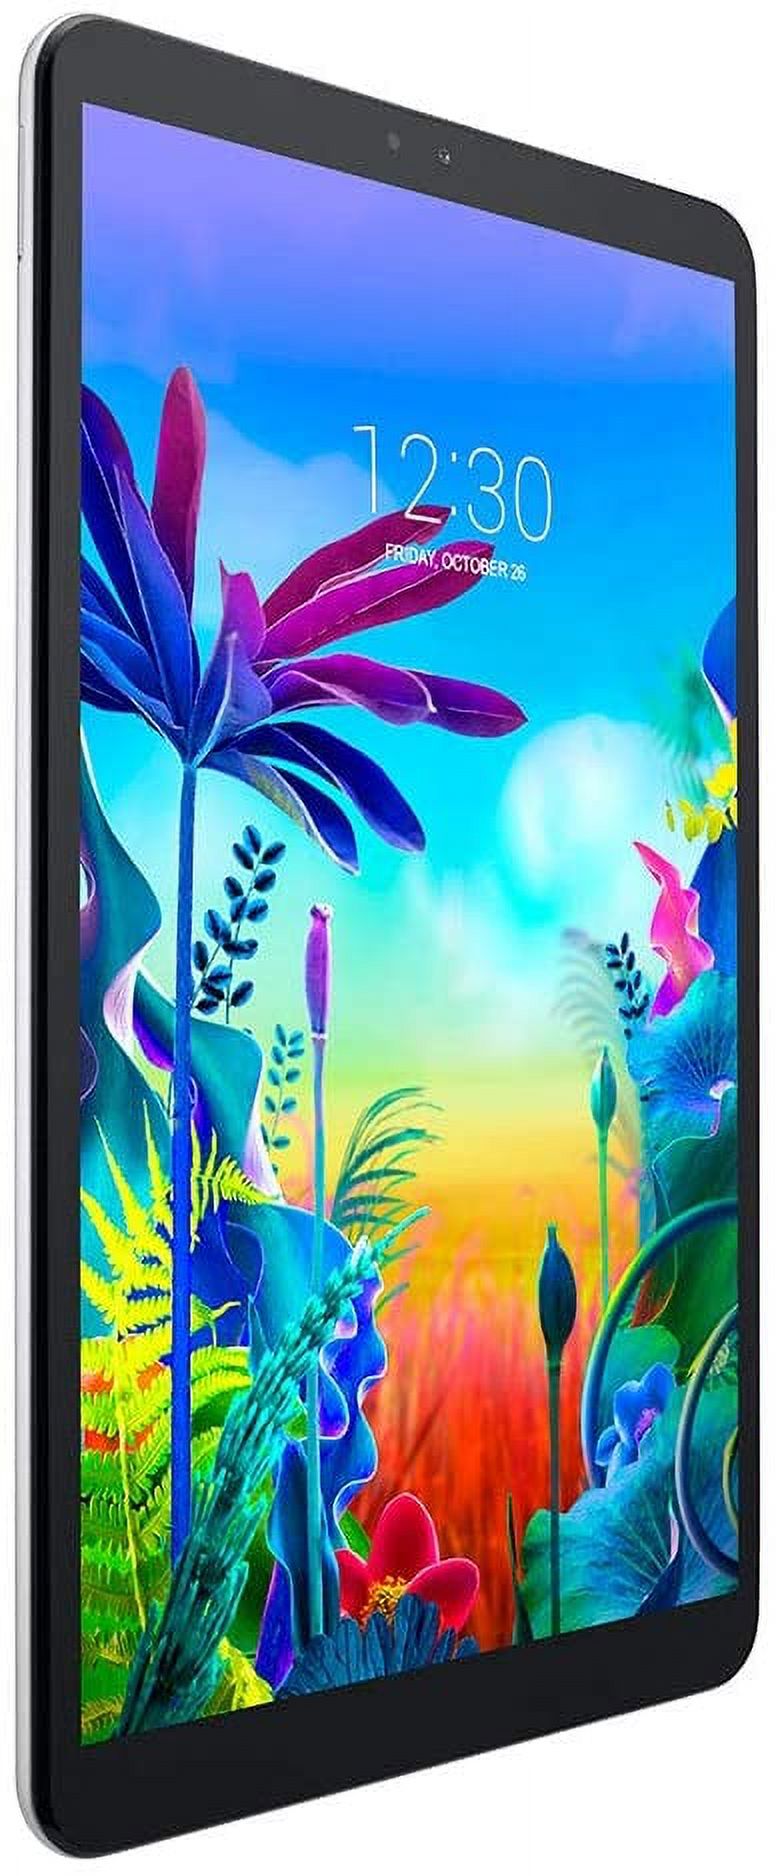 Used LG G Pad 5 10.1-inch (1920x1200) 4GB LTE Unlocked Tablet, 4GB RAM, 32GB Storage, Fingerprint, Android 9.0 w/ Mazepoly 2 in 1 Stylus Pen - image 2 of 9